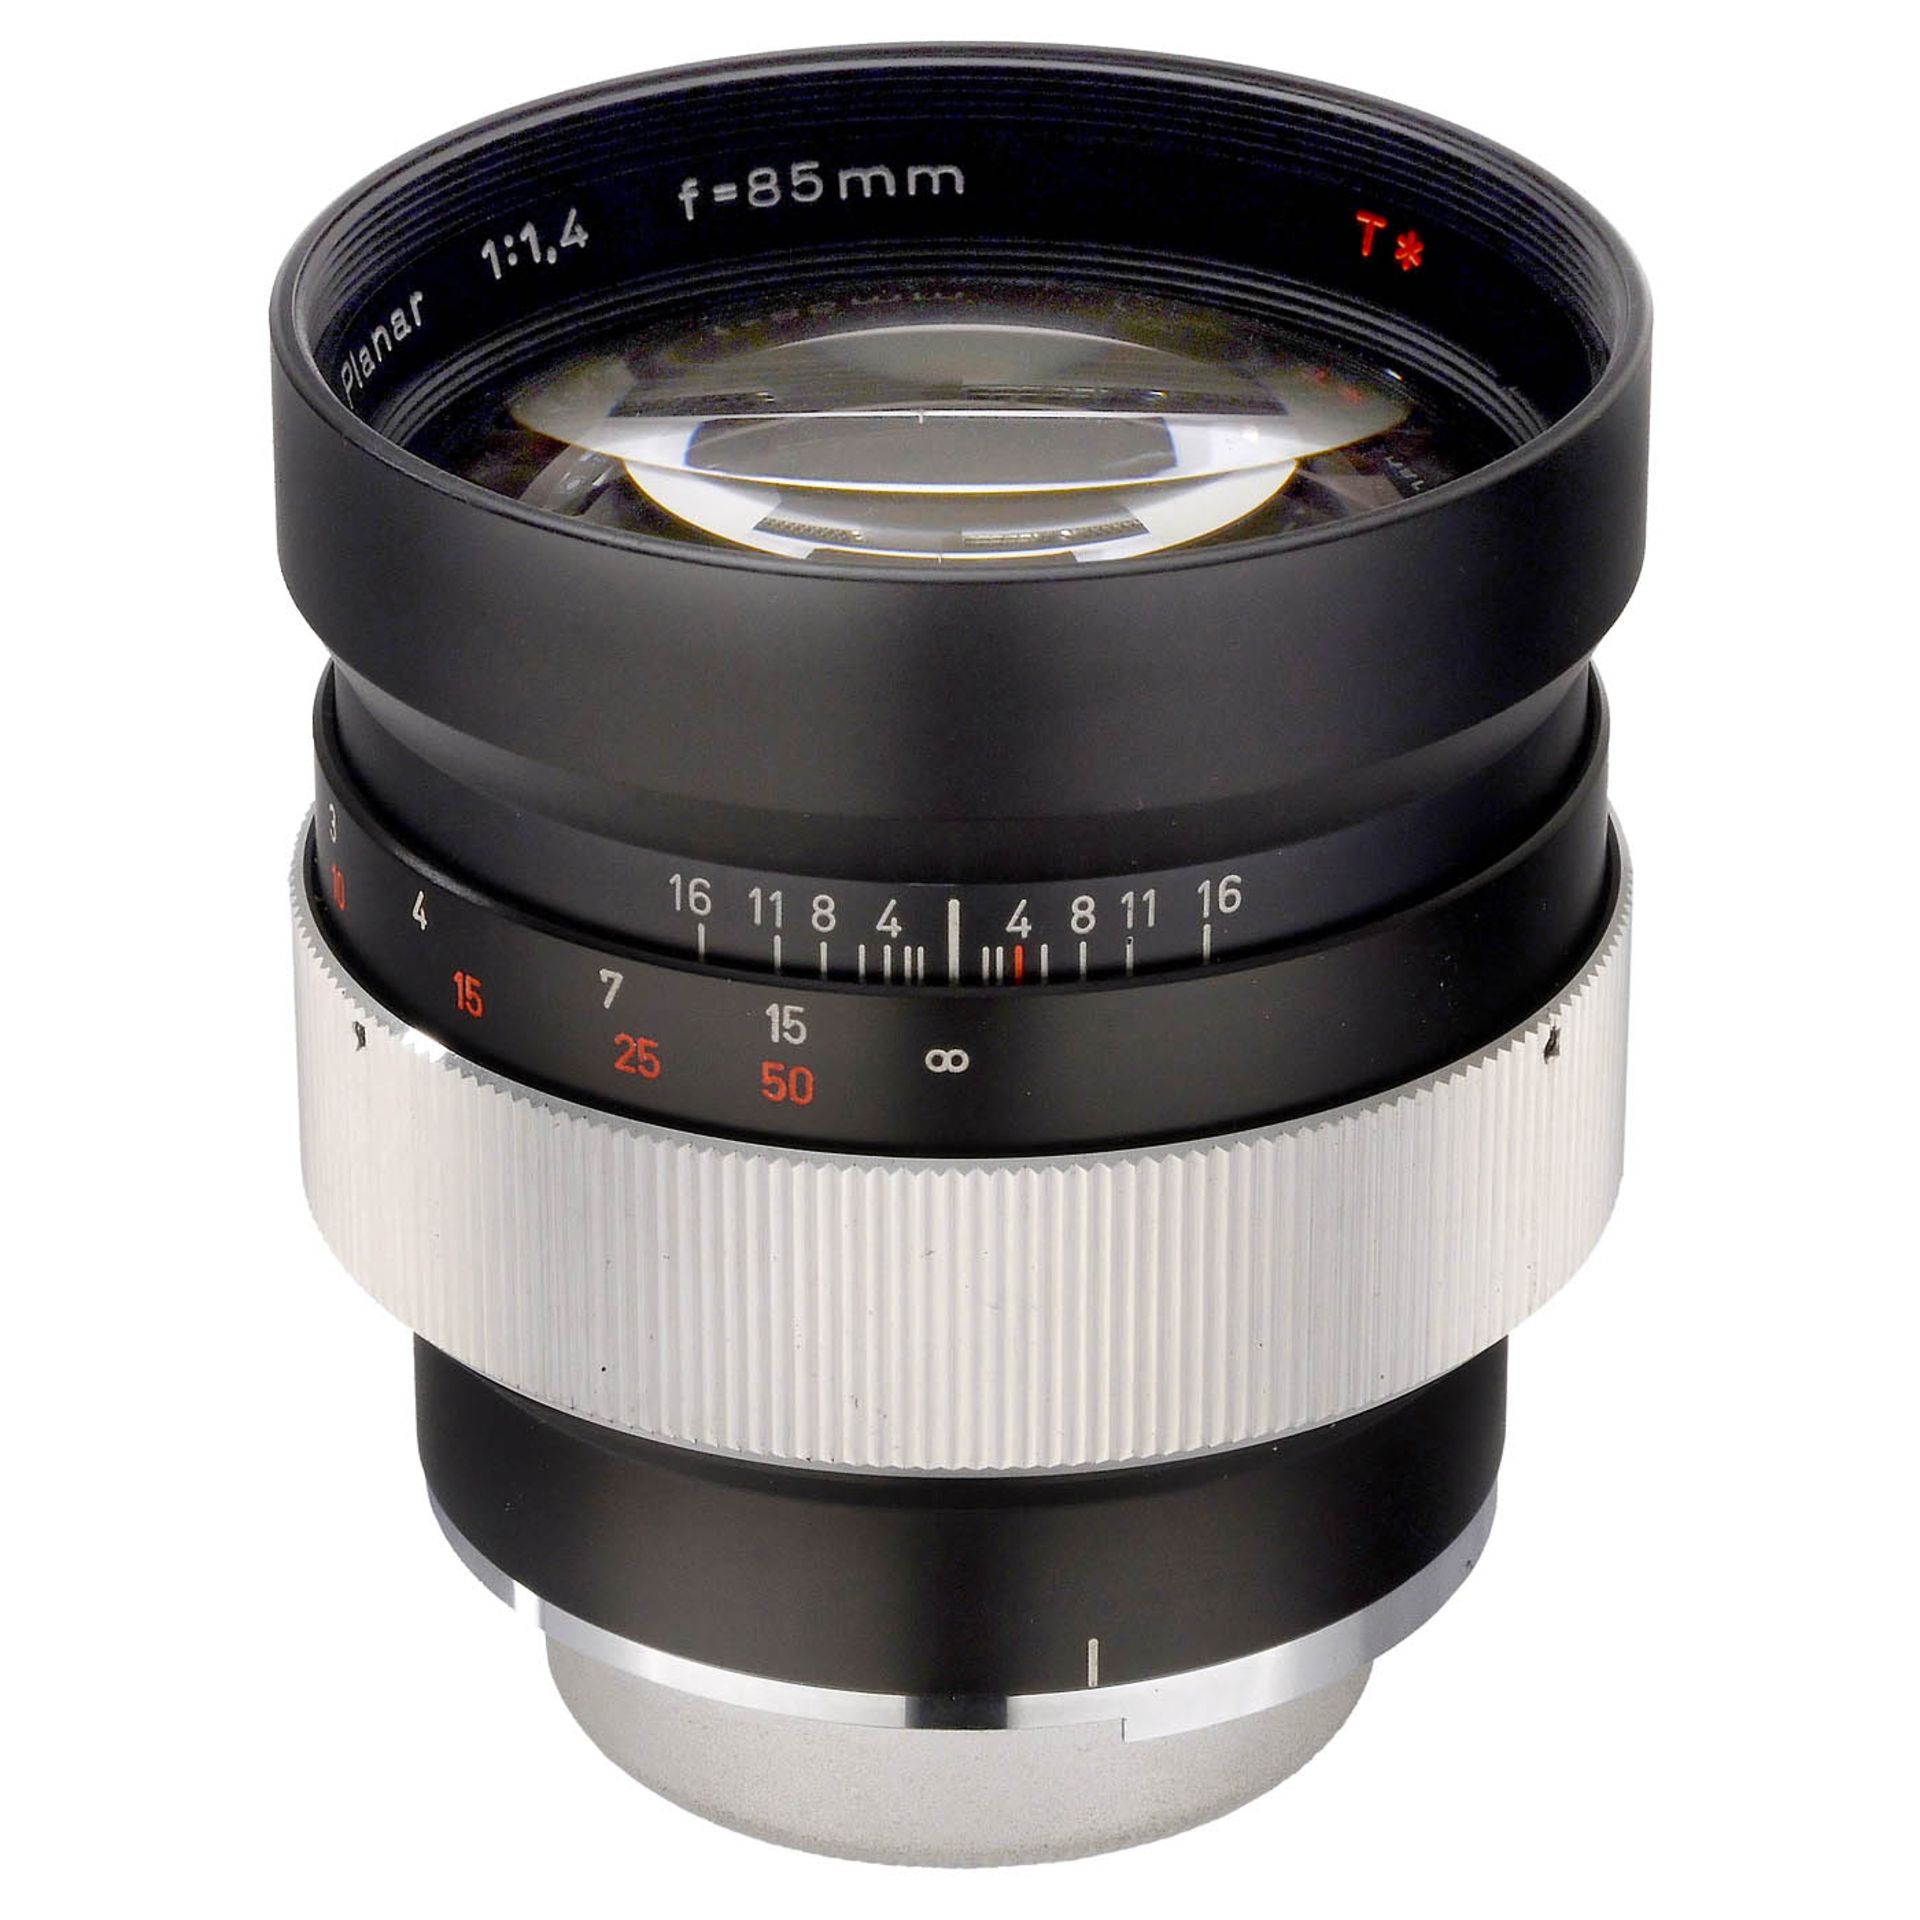 Planar 1.4/85 mm Lens for the Contarex - Image 2 of 3